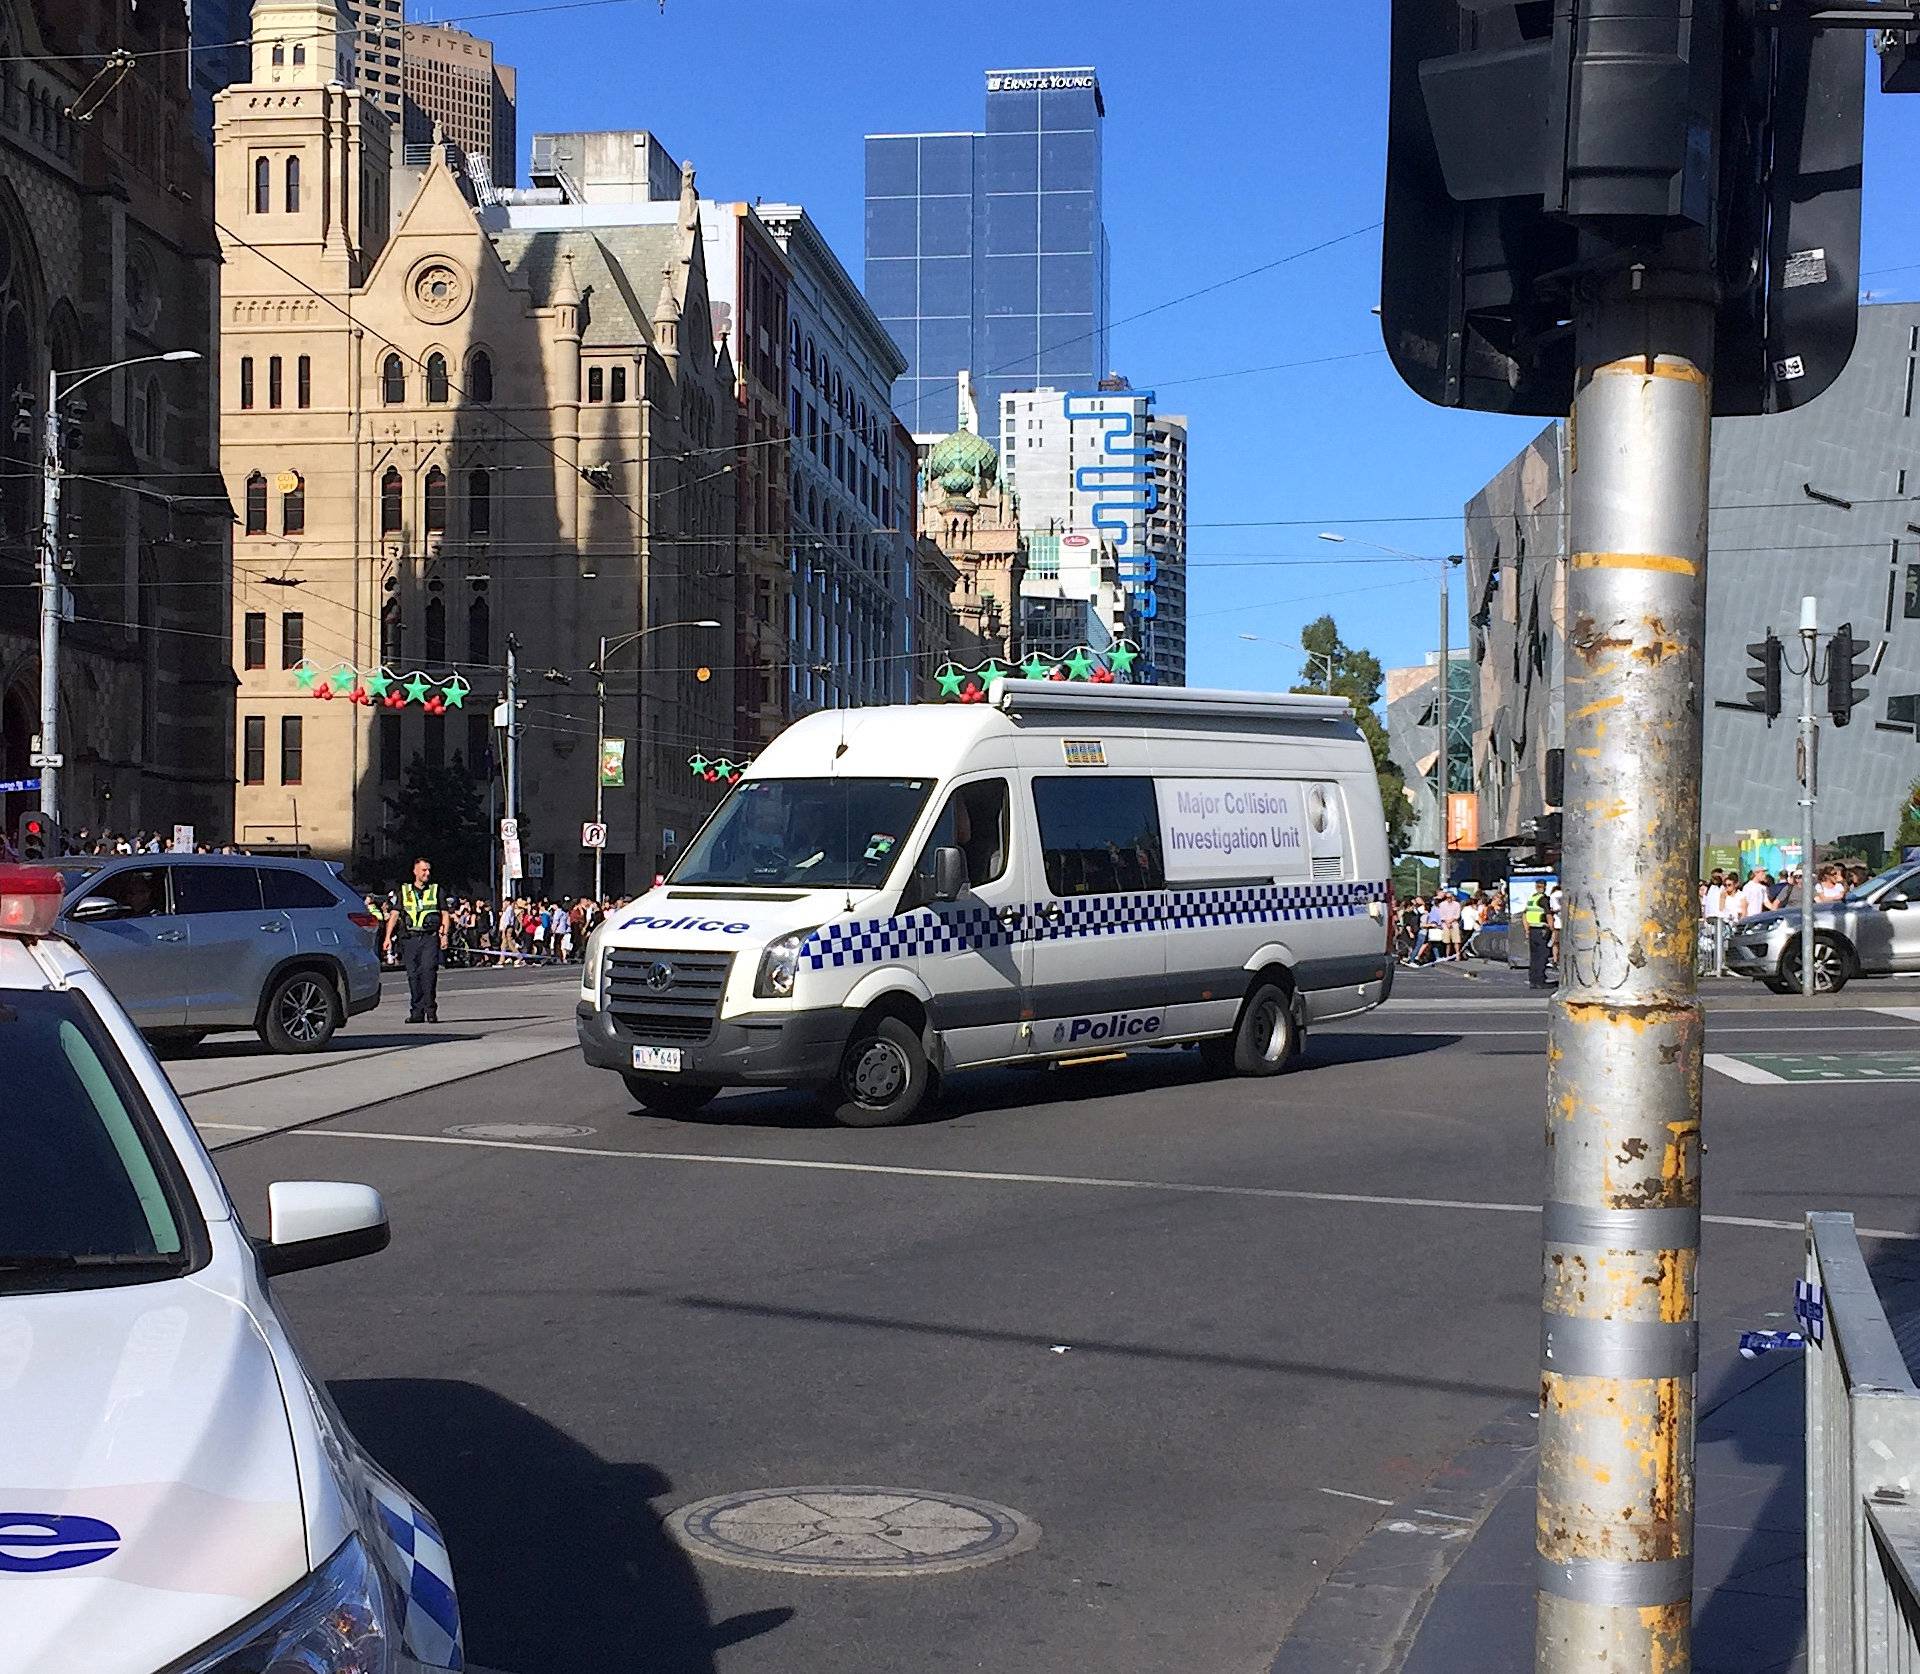 Members of the public stand behind police tape after Australian police said on Thursday they have arrested the driver of a vehicle that ploughed into pedestrians at a crowded intersection near the Flinders Street train station in central Melbourne